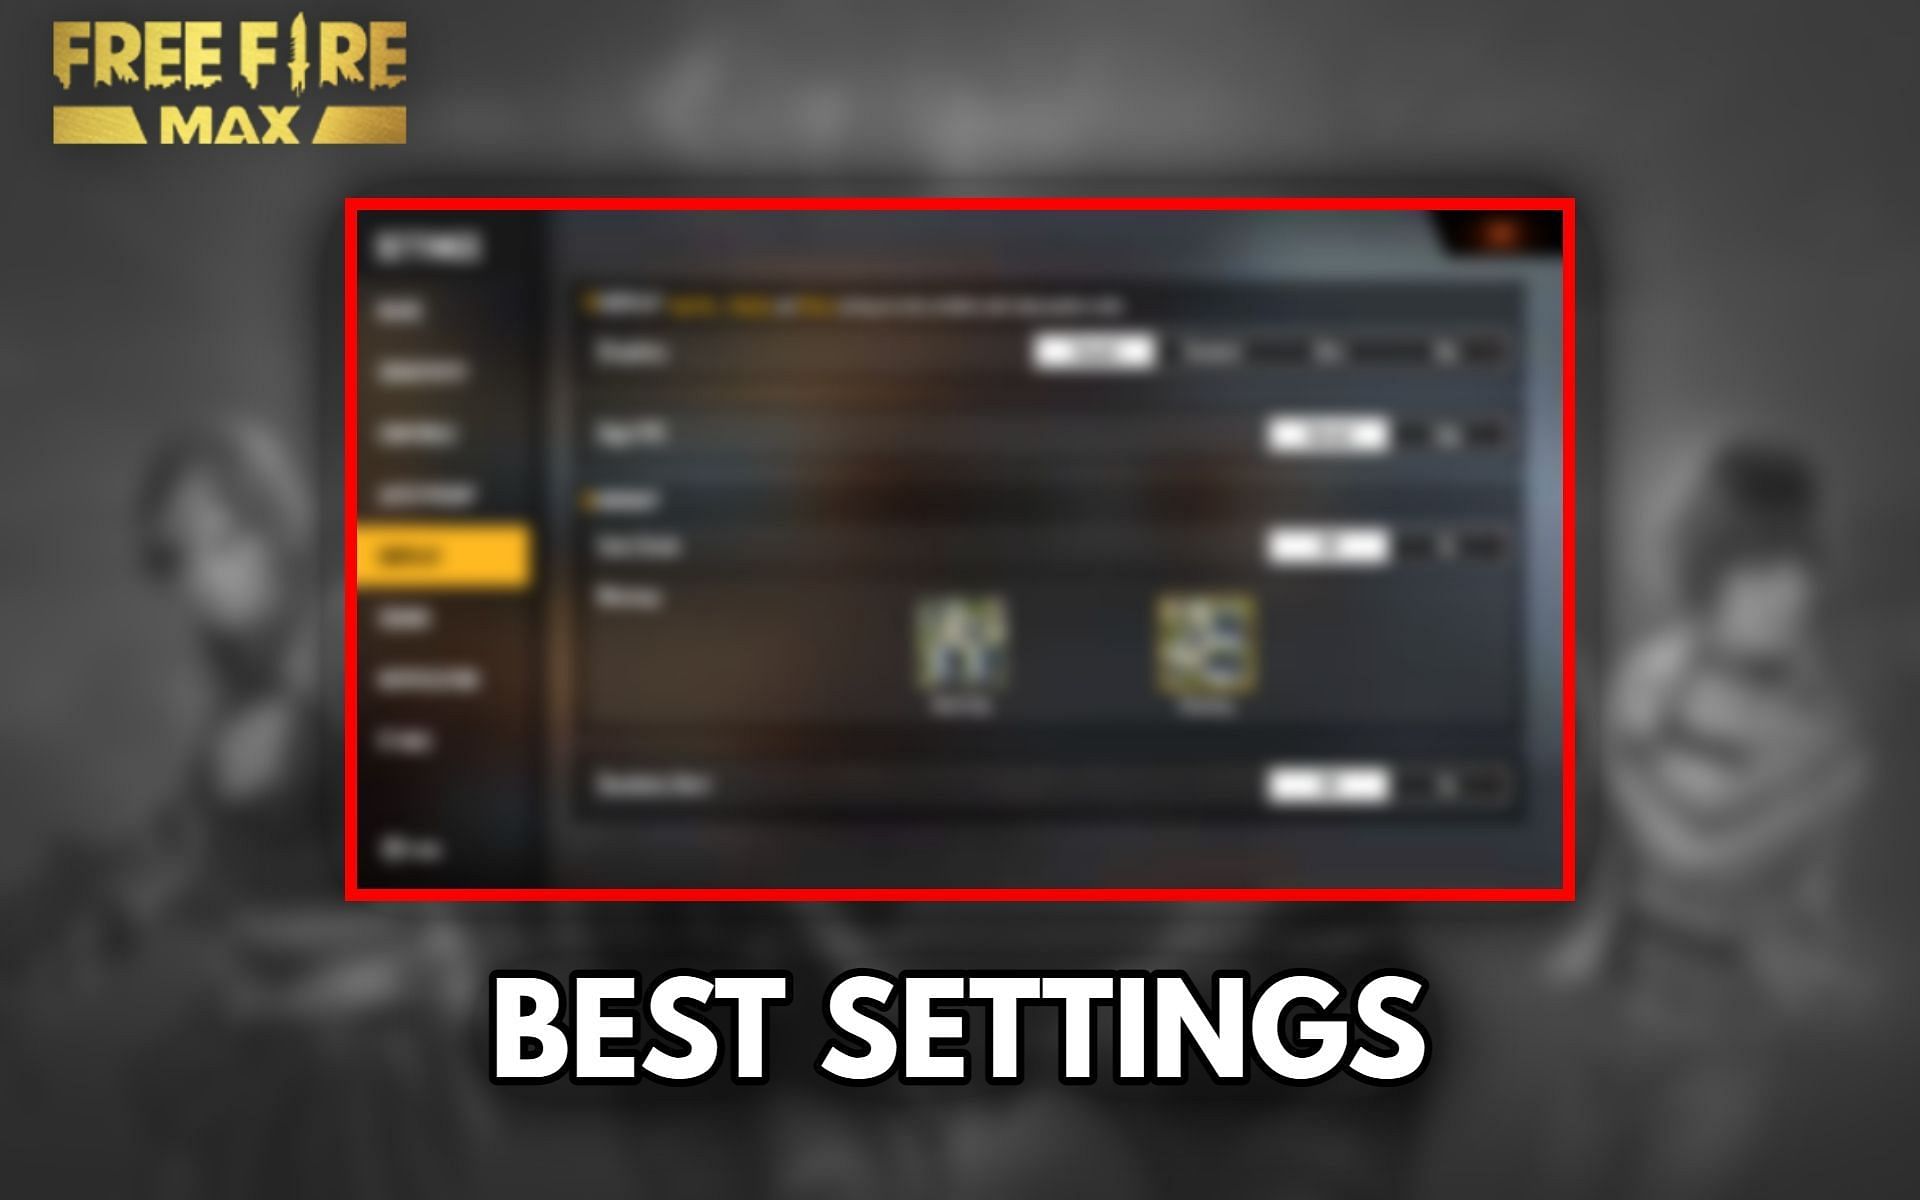 Details about the best settings to use in the game for no lag (Image via Social Blade)